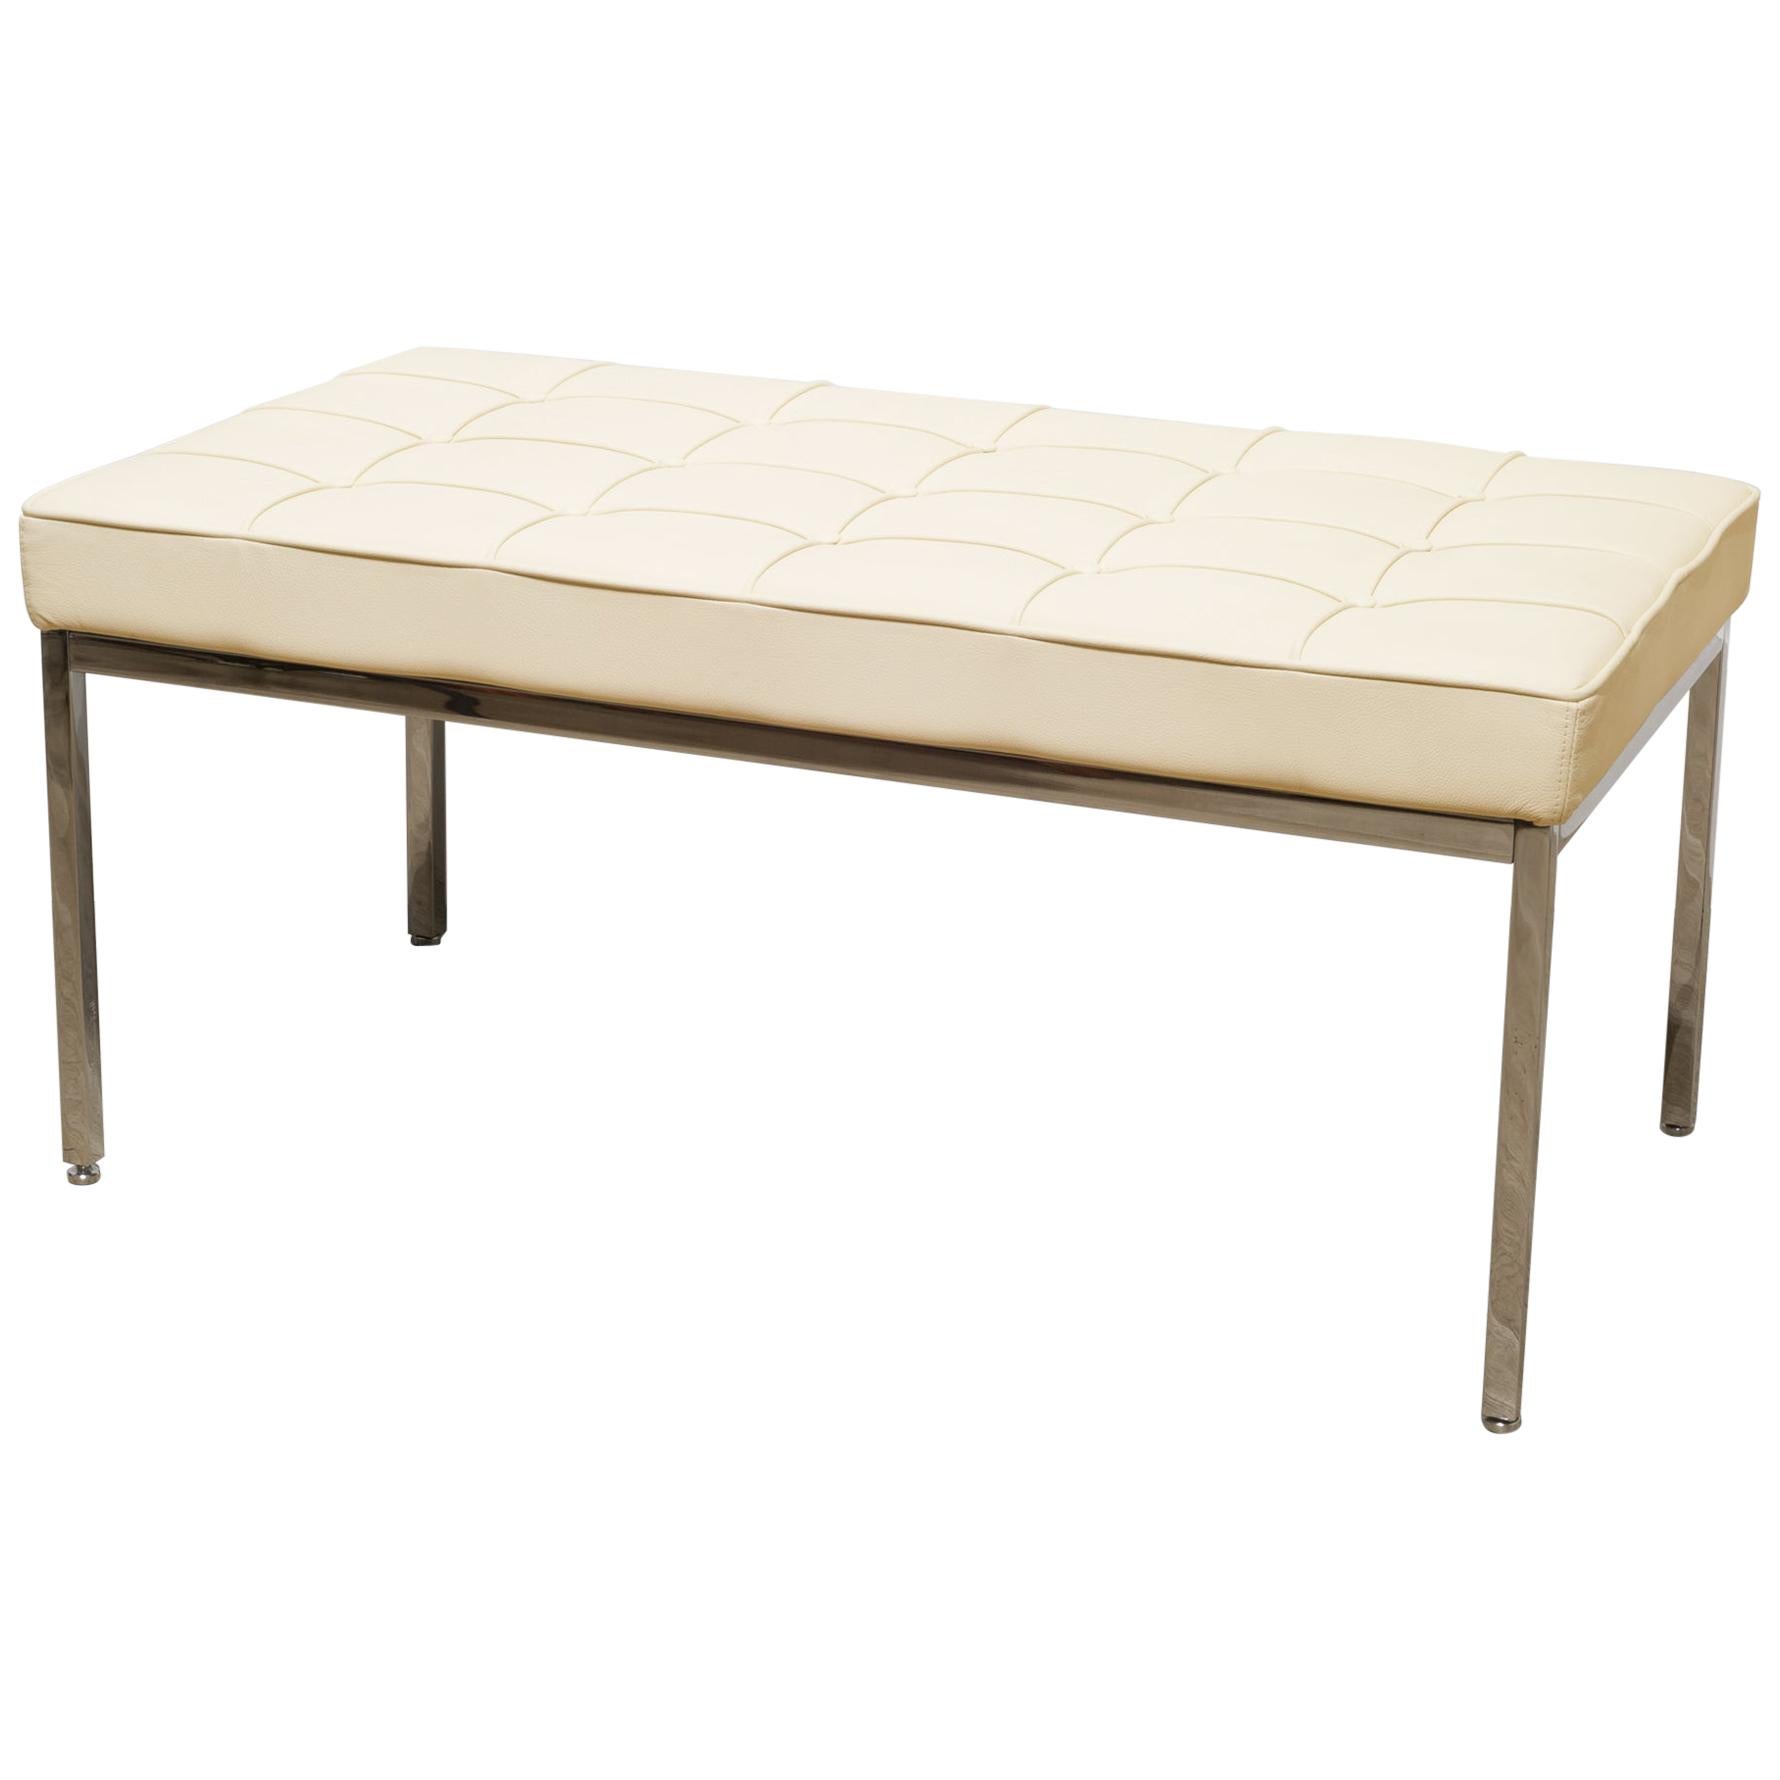  Florence Knoll Two-Seat Bench in Ivory Leather-Like New